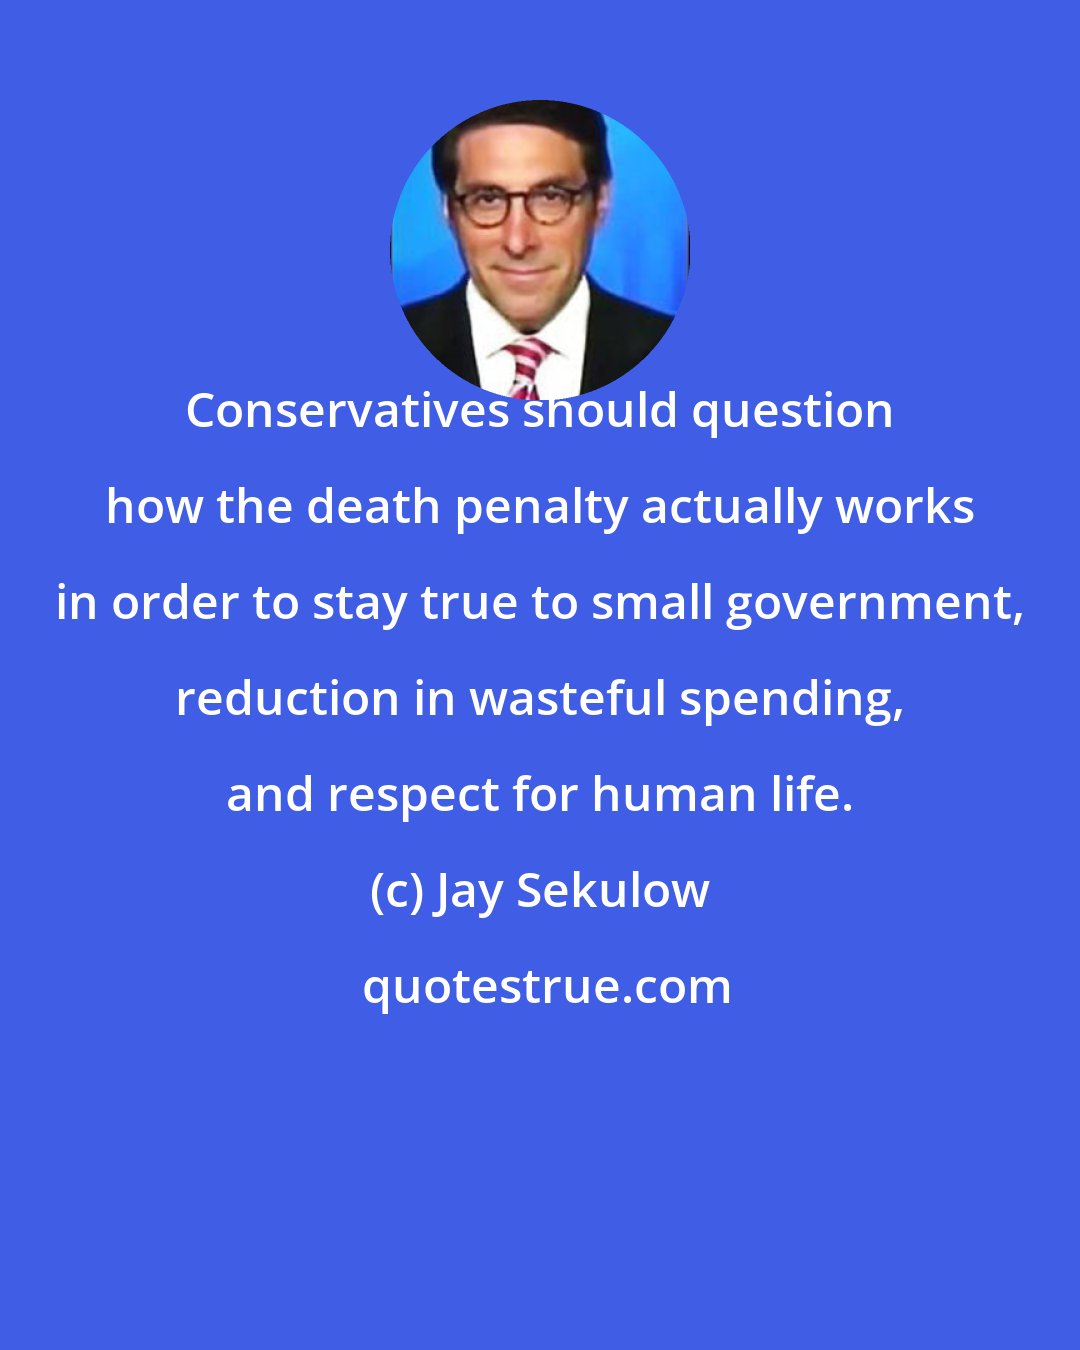 Jay Sekulow: Conservatives should question how the death penalty actually works in order to stay true to small government, reduction in wasteful spending, and respect for human life.